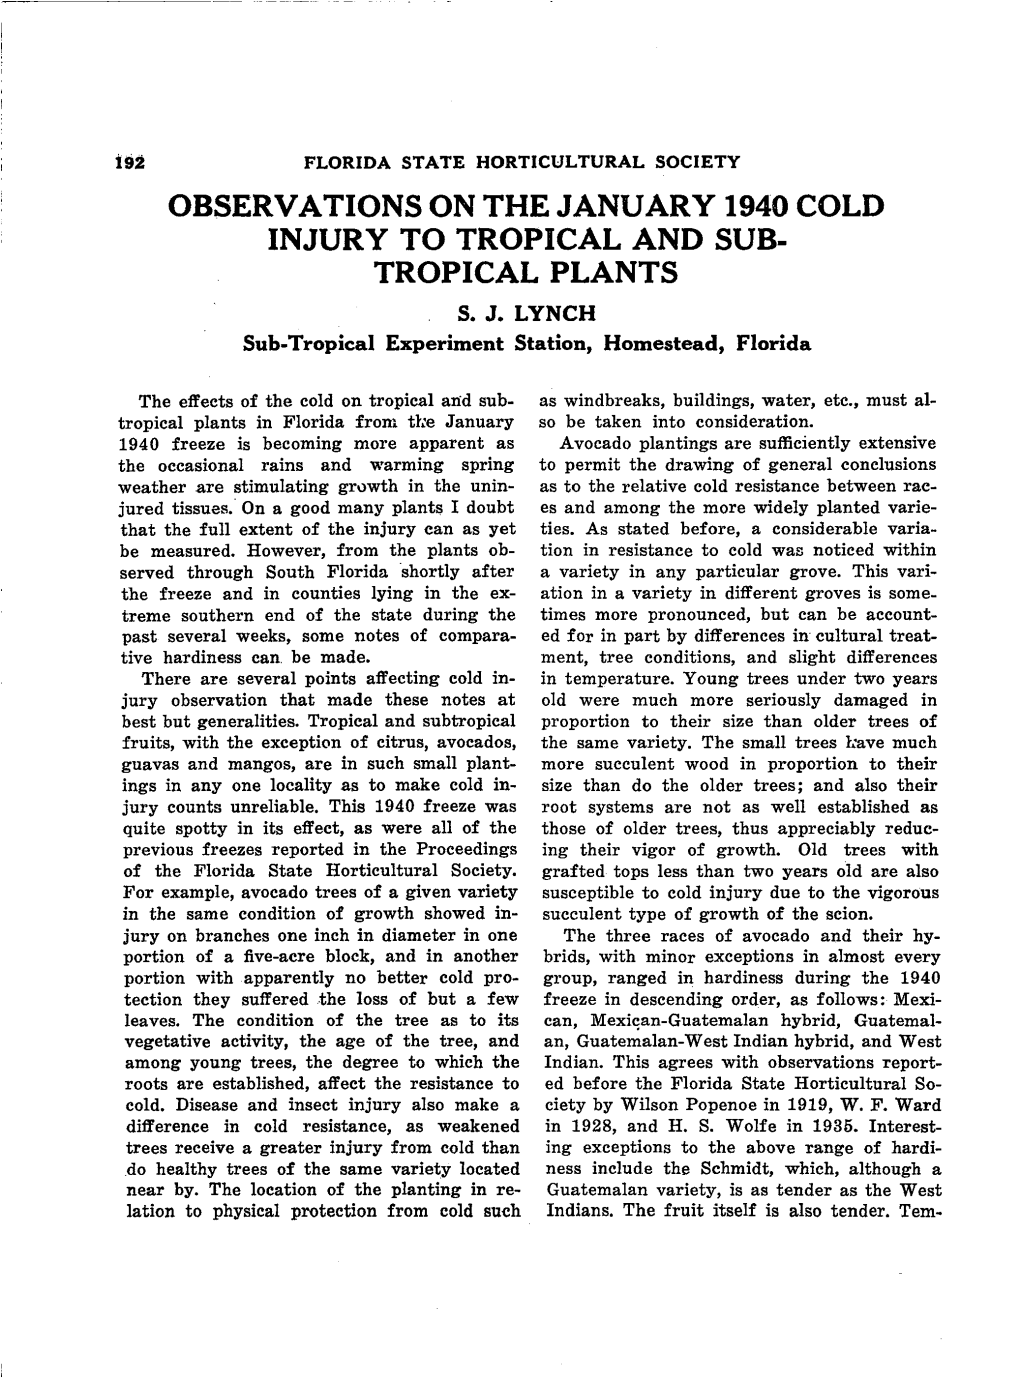 Observations on the January 1940 Cold Injury to Tropical and Sub Tropical Plants